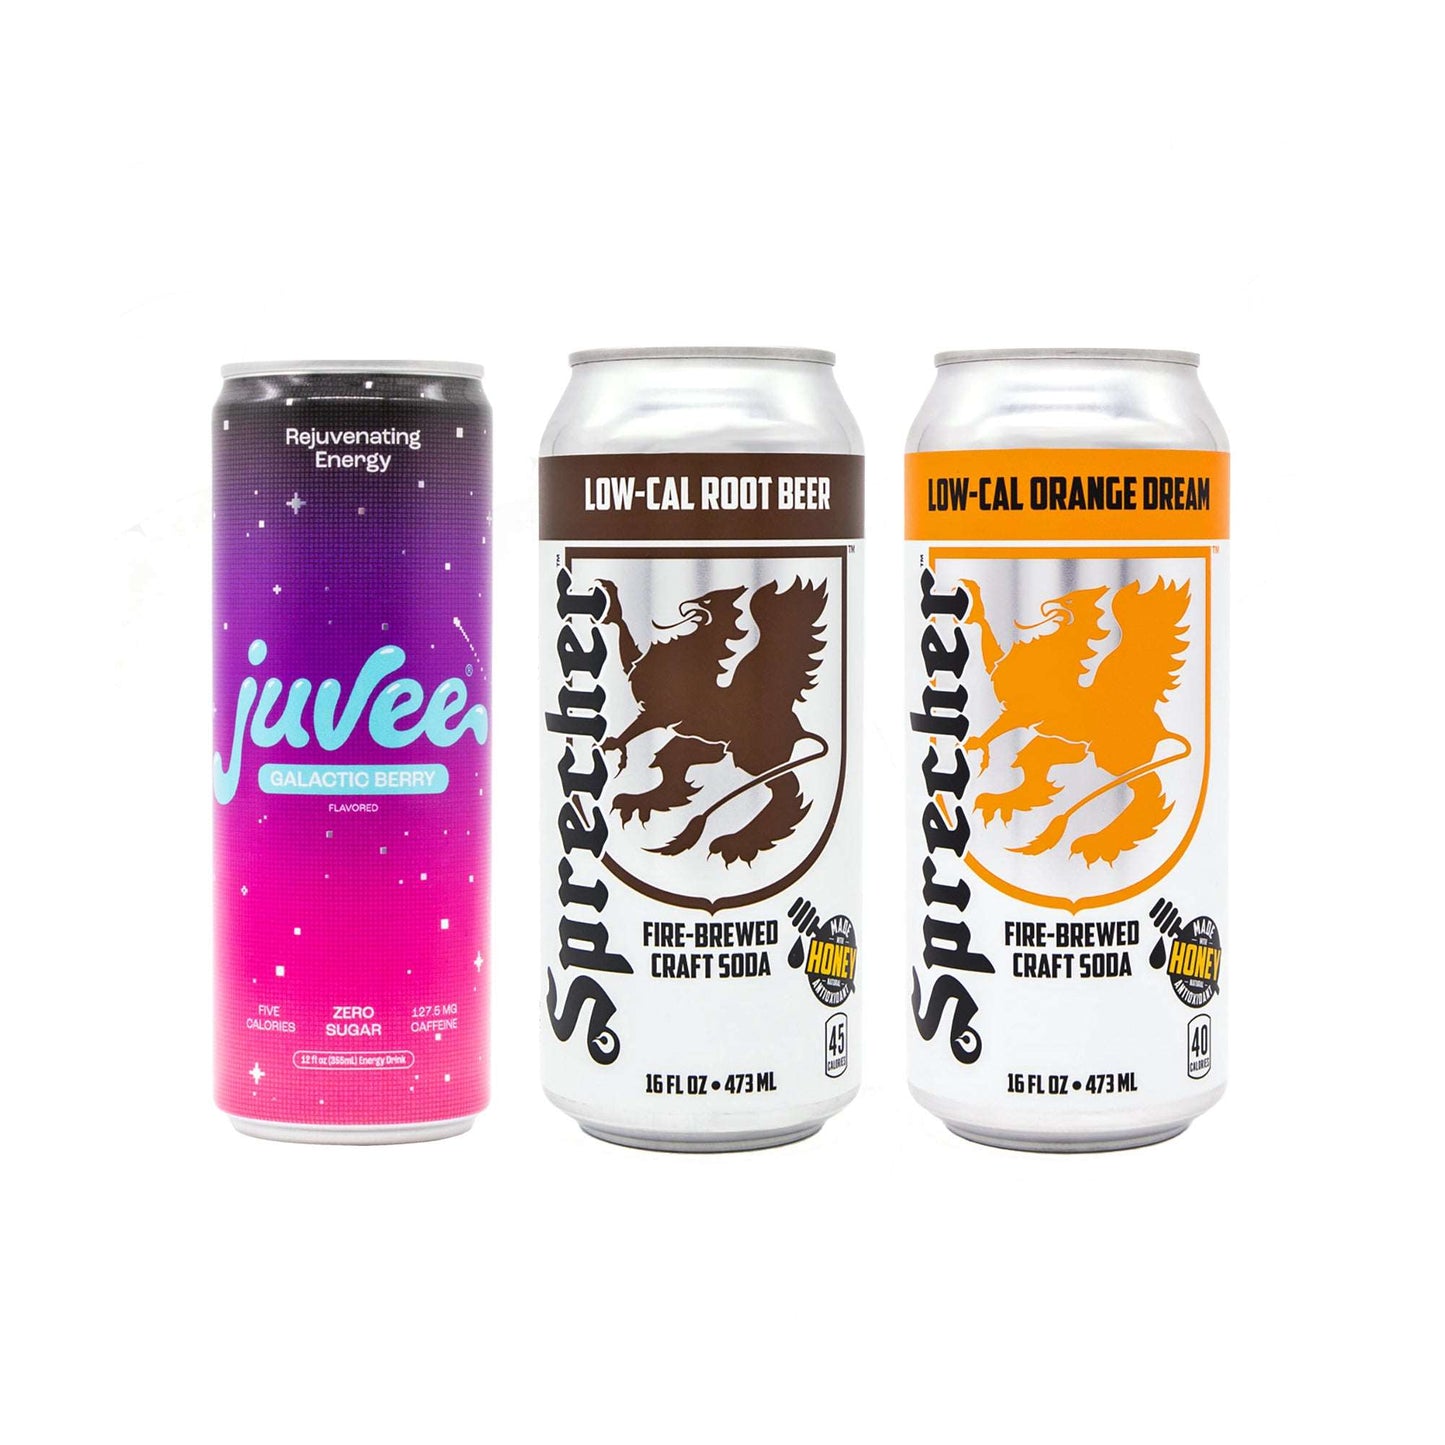 Juvee and Sprecher Variety 12 Pack